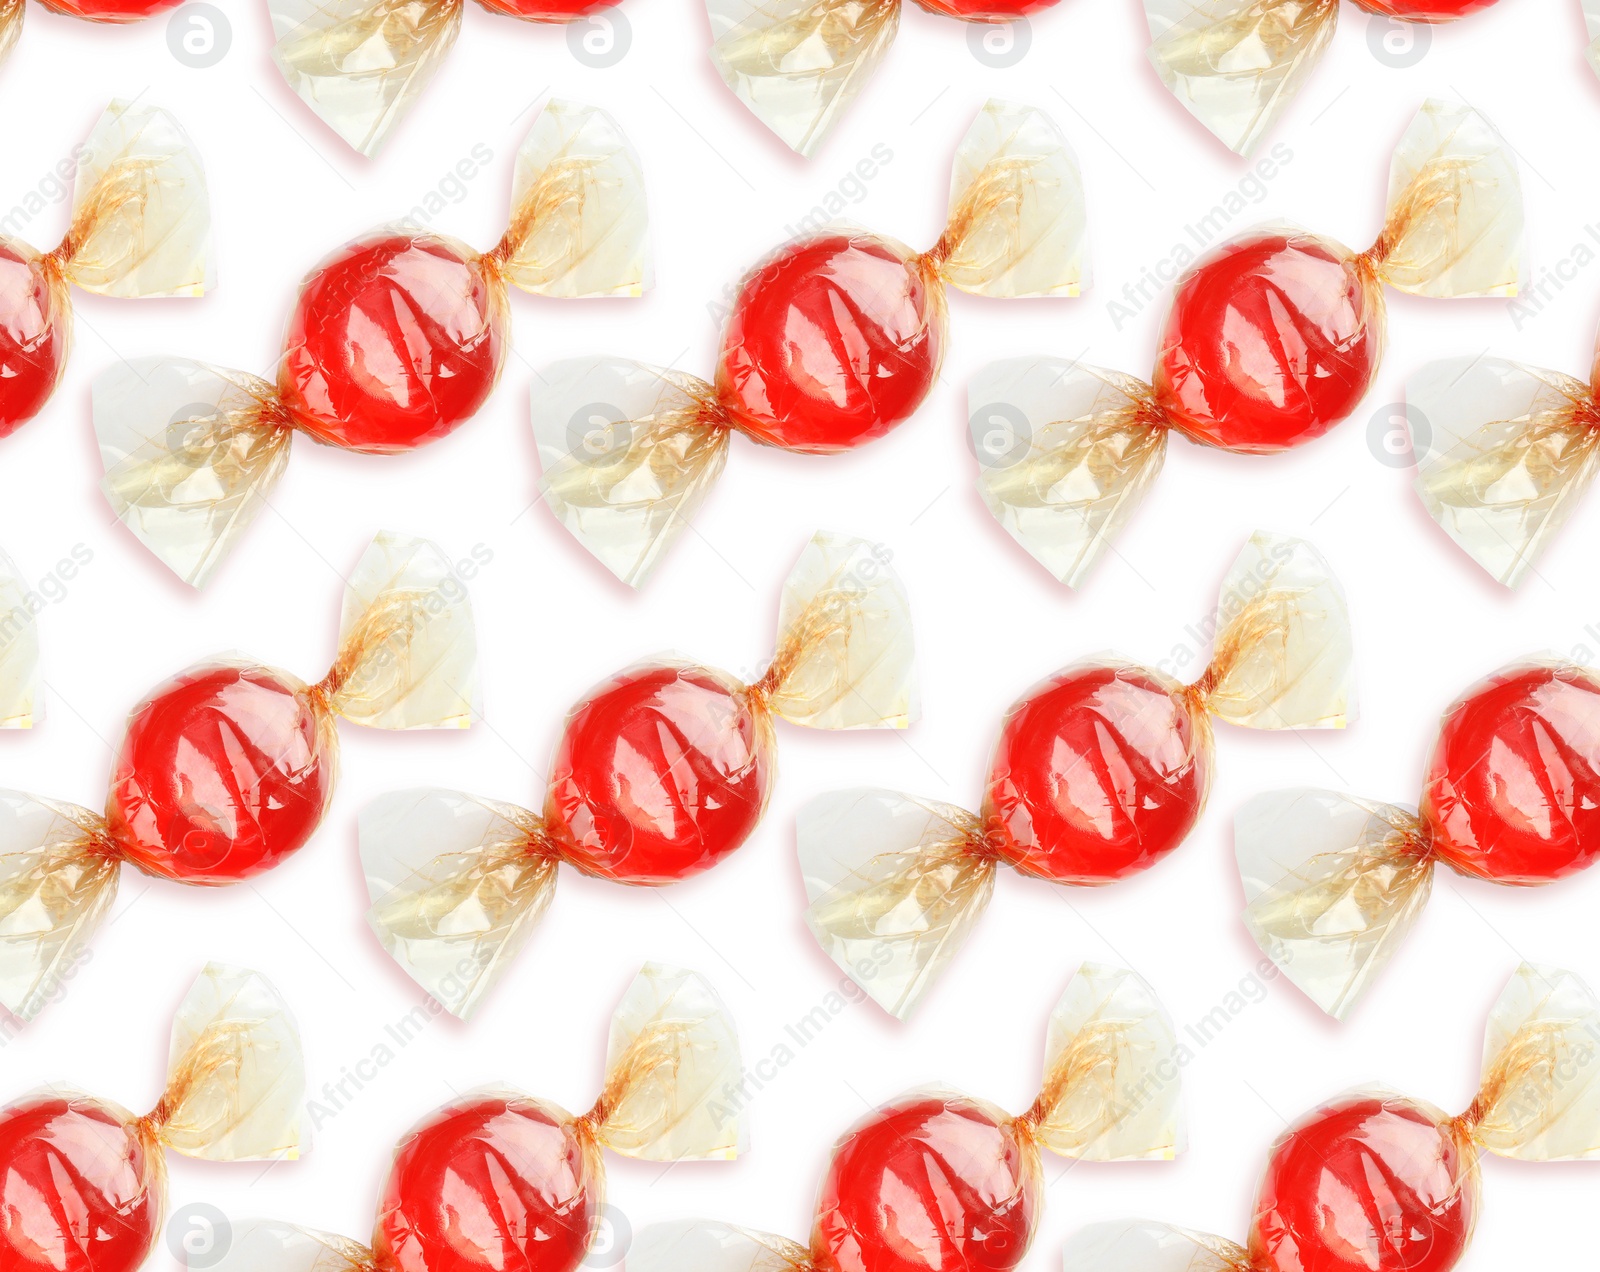 Image of Tasty candies on white background. Pattern design